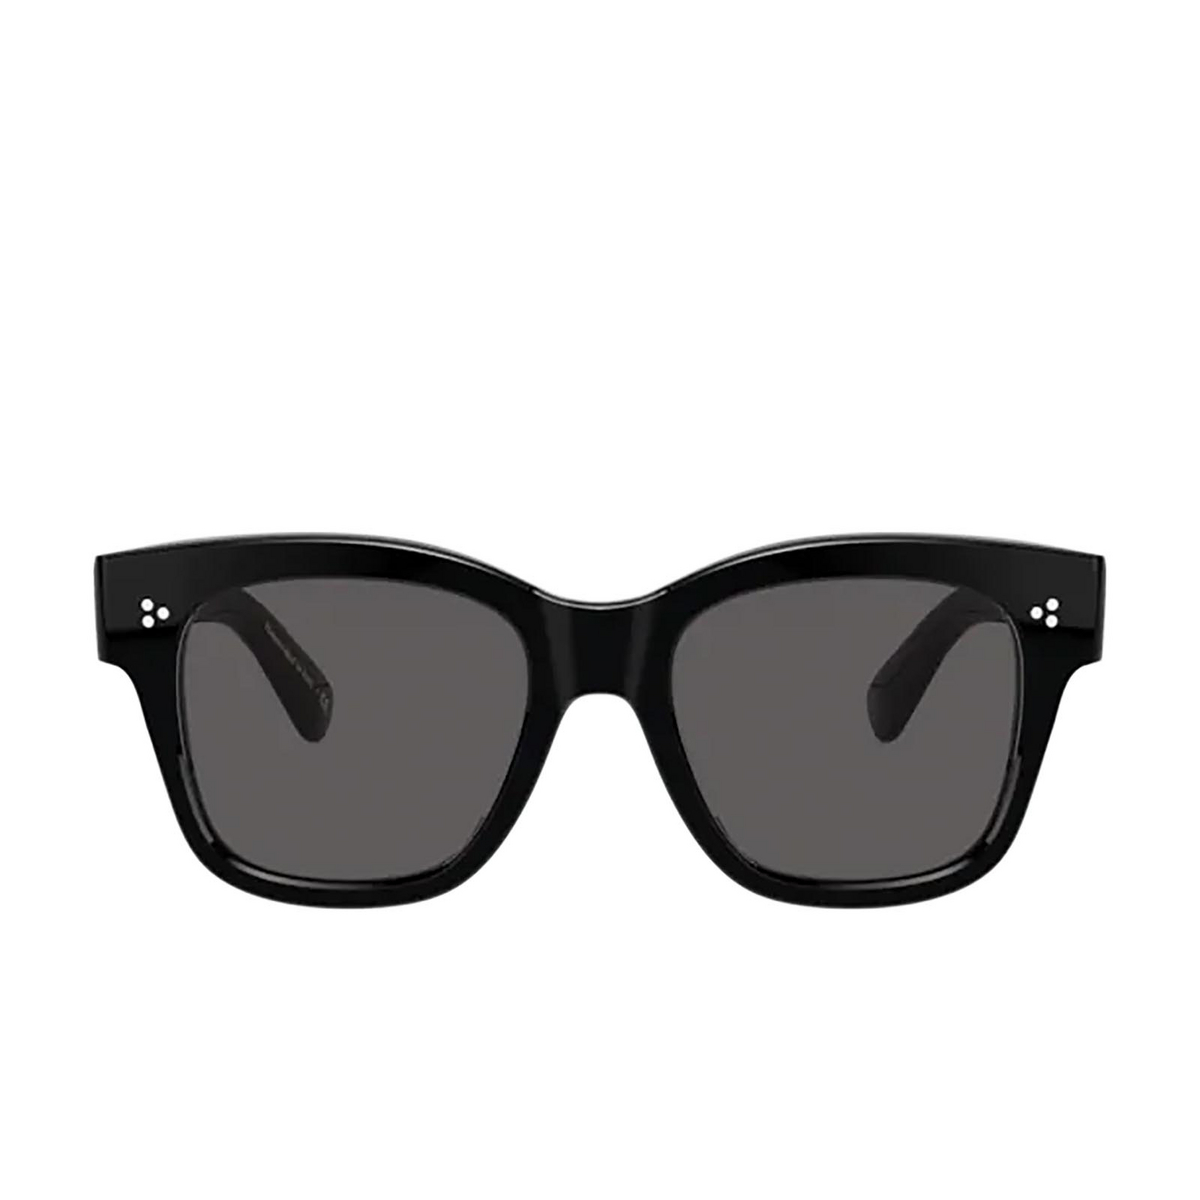 Oliver Peoples® Sunglasses: Melery OV5442SU color Black 100581 - front view.